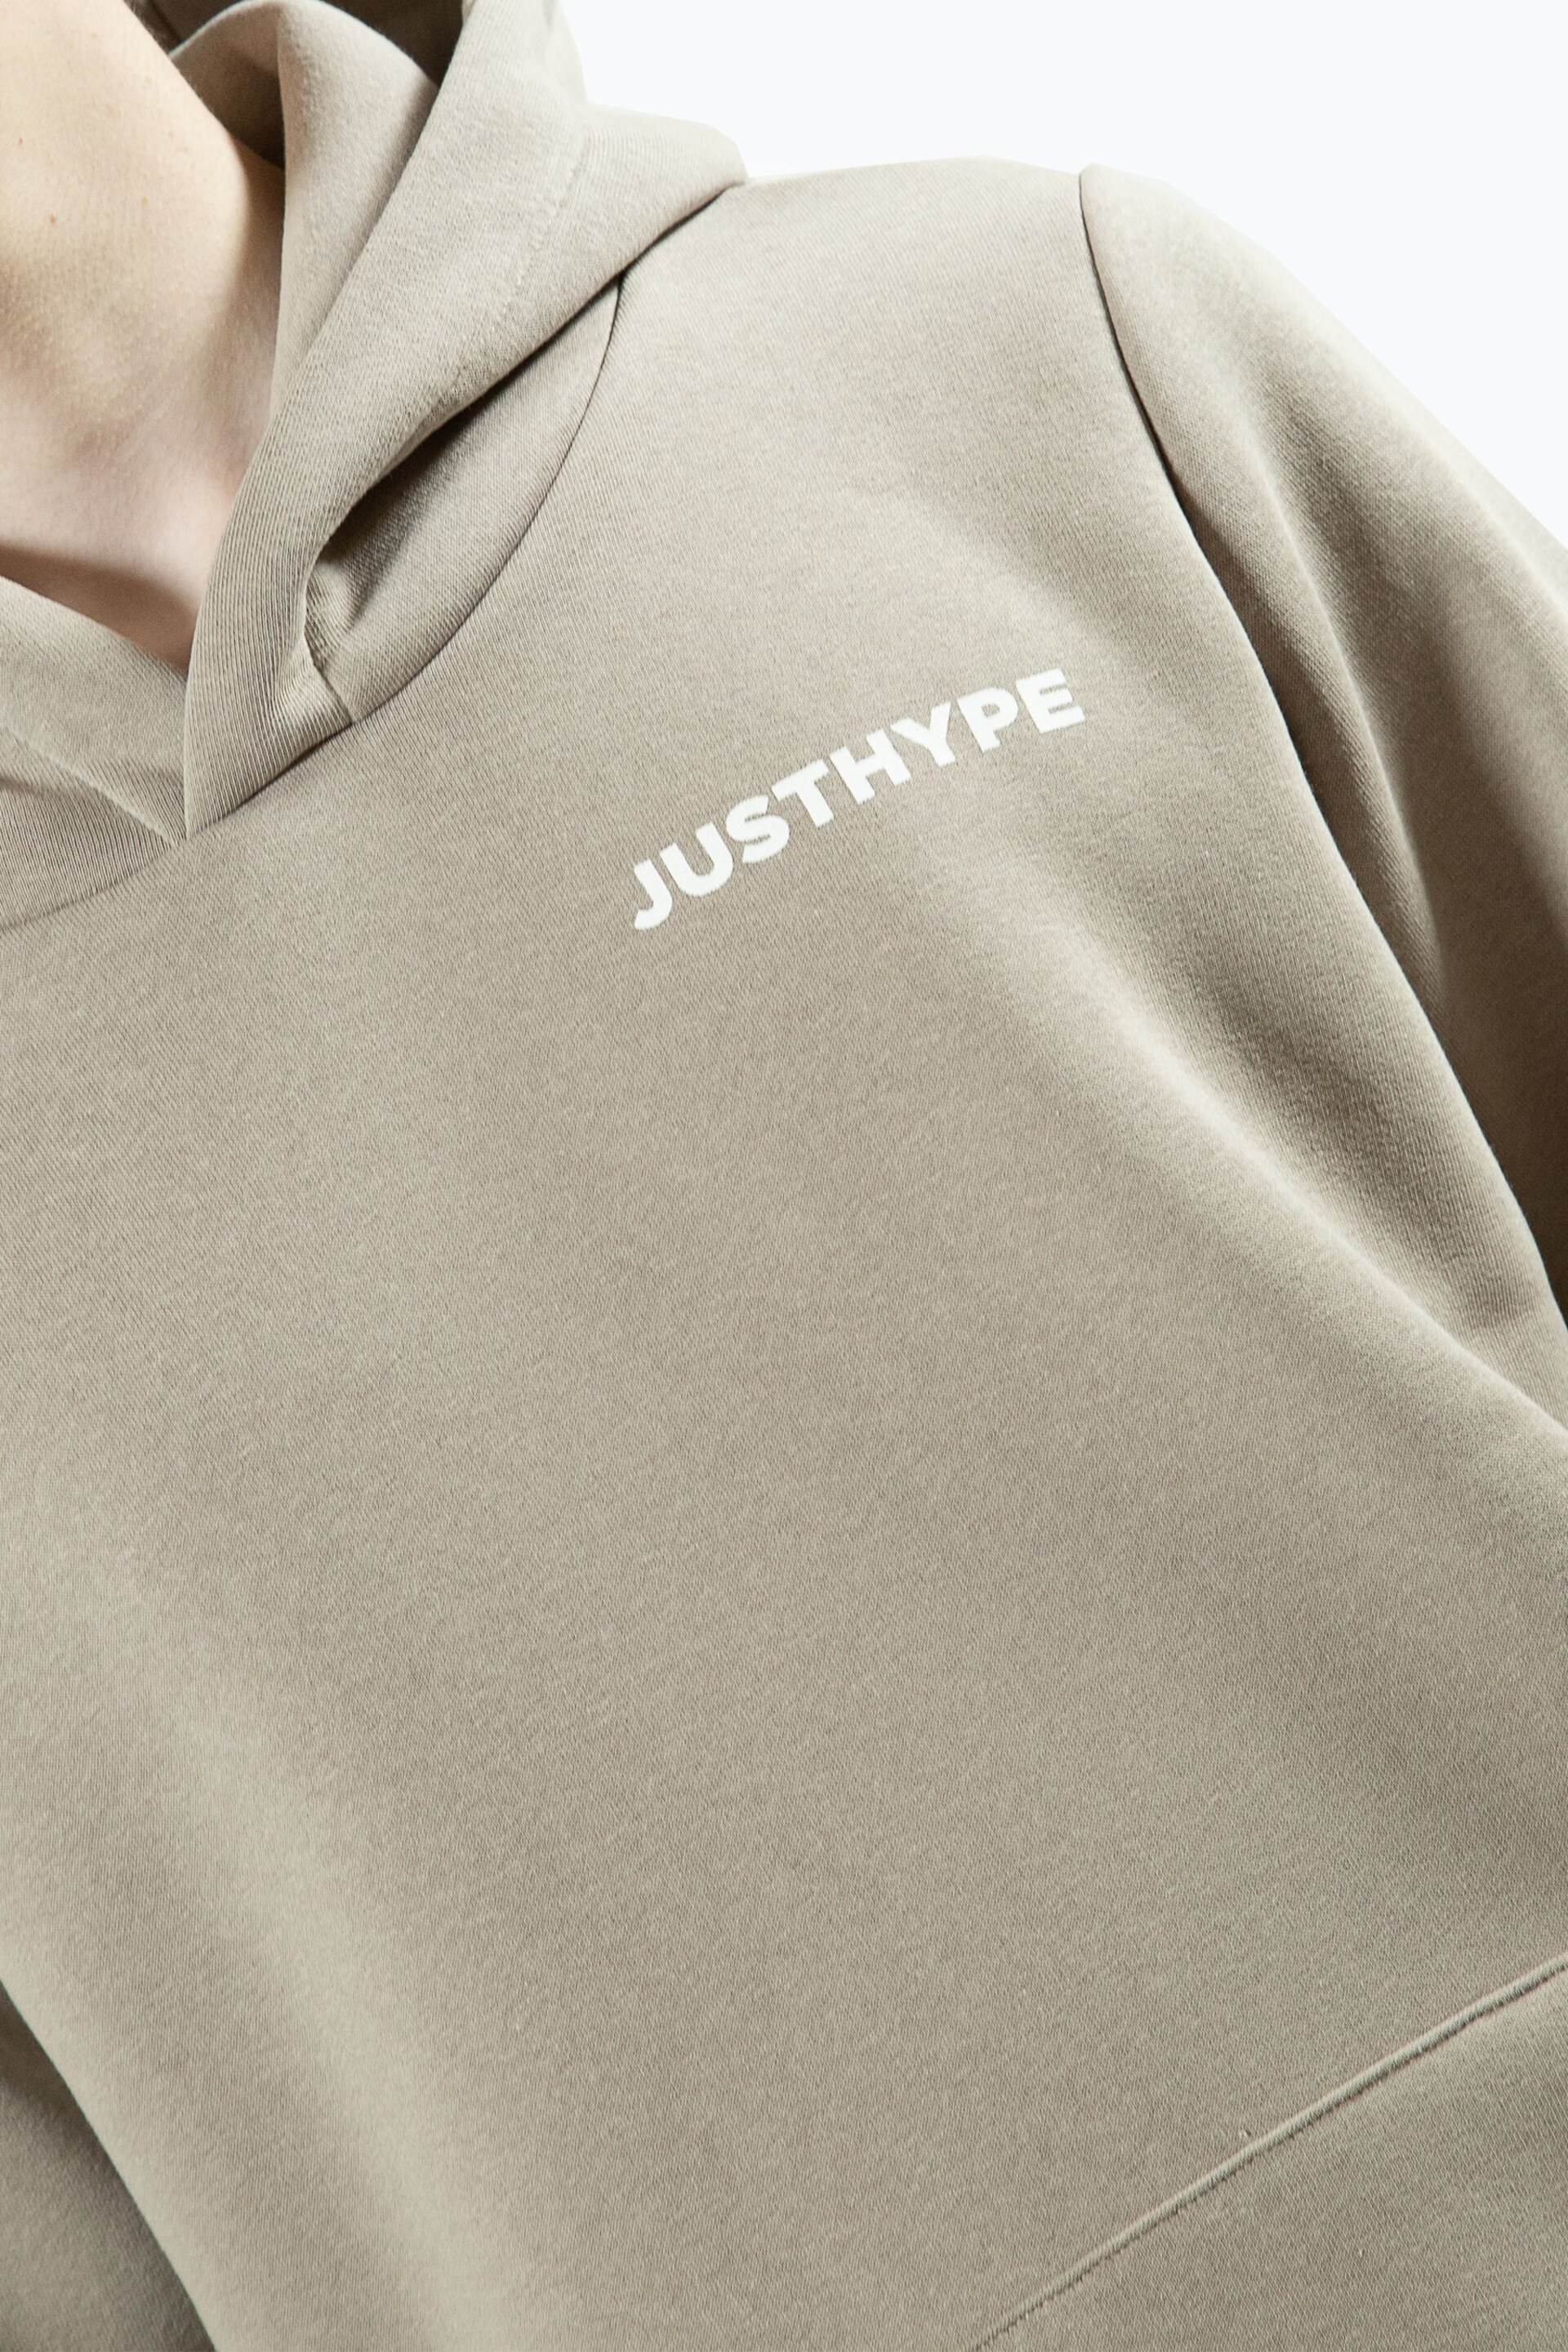 Hype Boys Decade Neutral Hoodie - Image 3 of 5